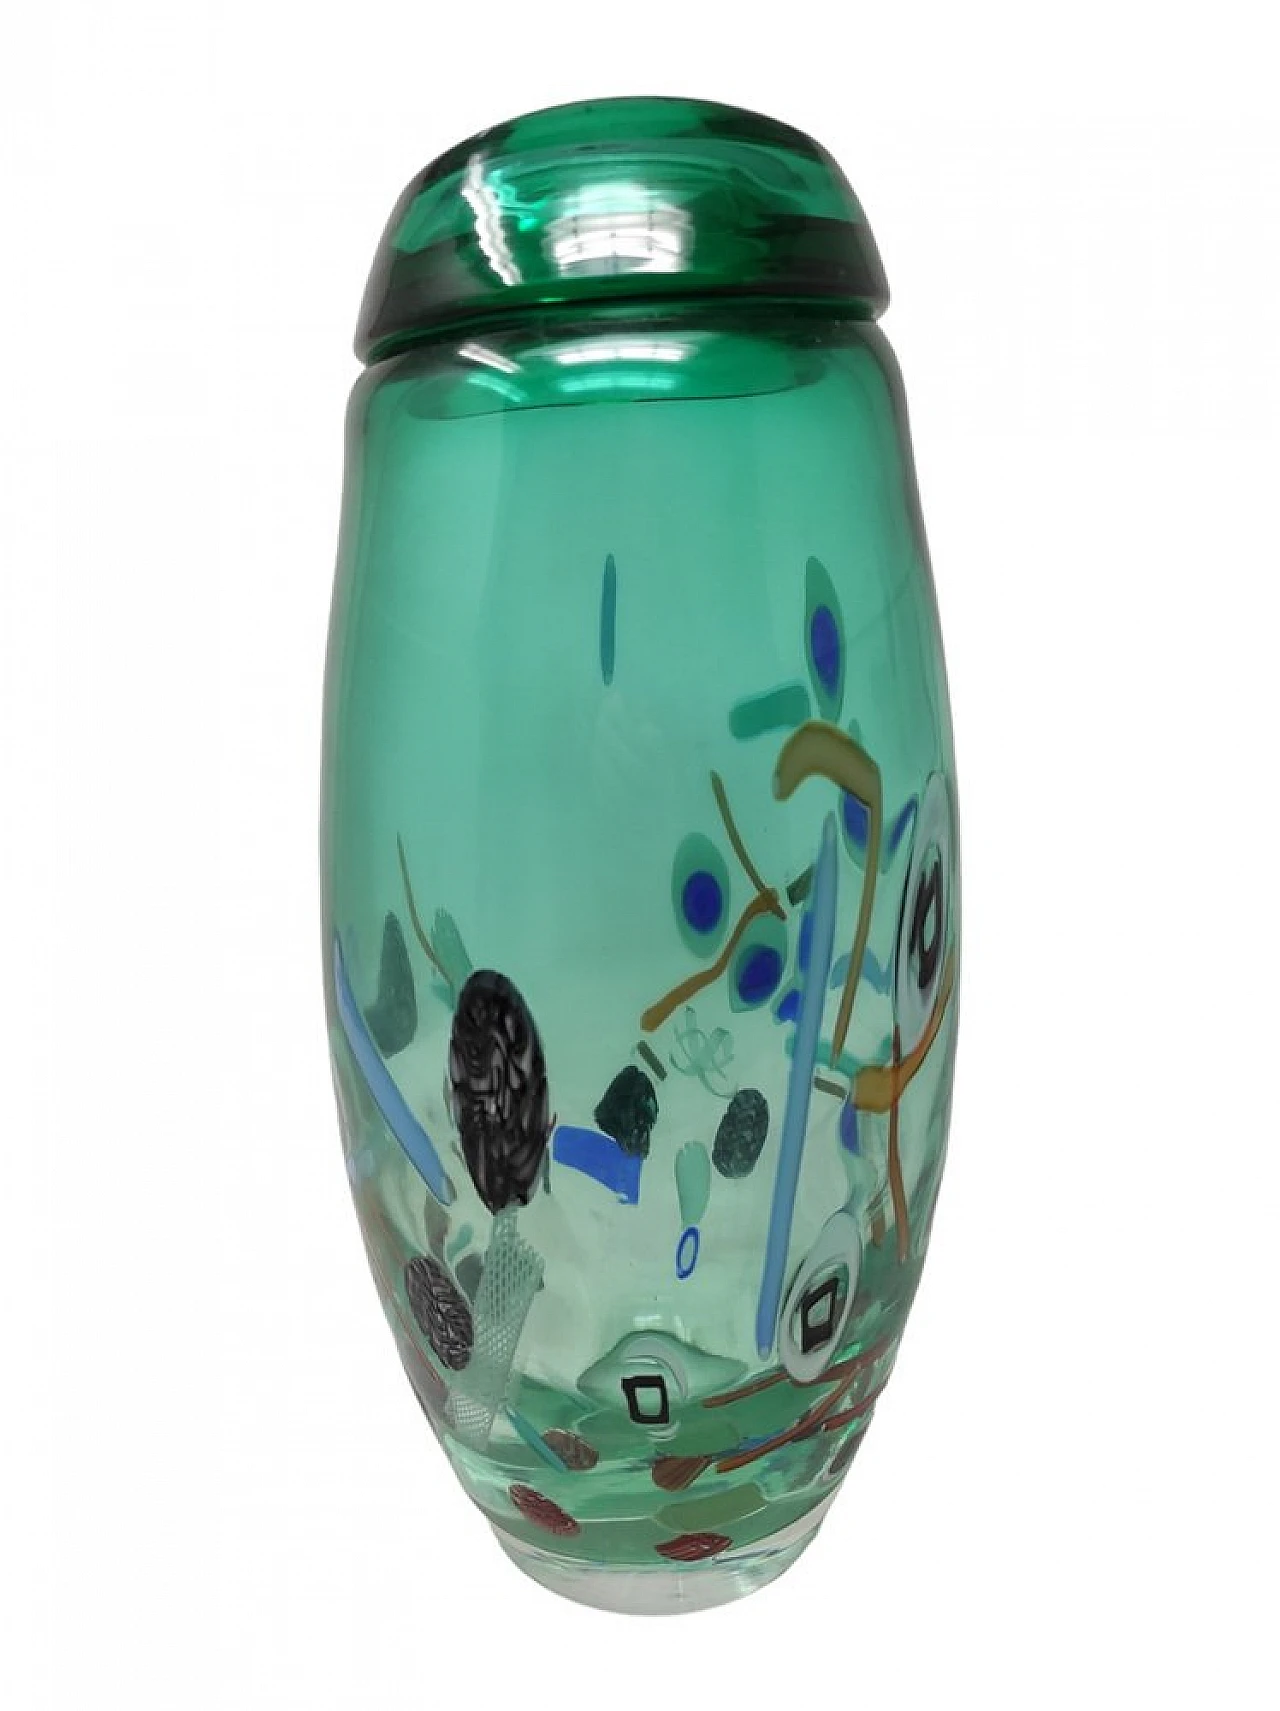 Teal Murano glass vase by M. Costantini, 1998 2